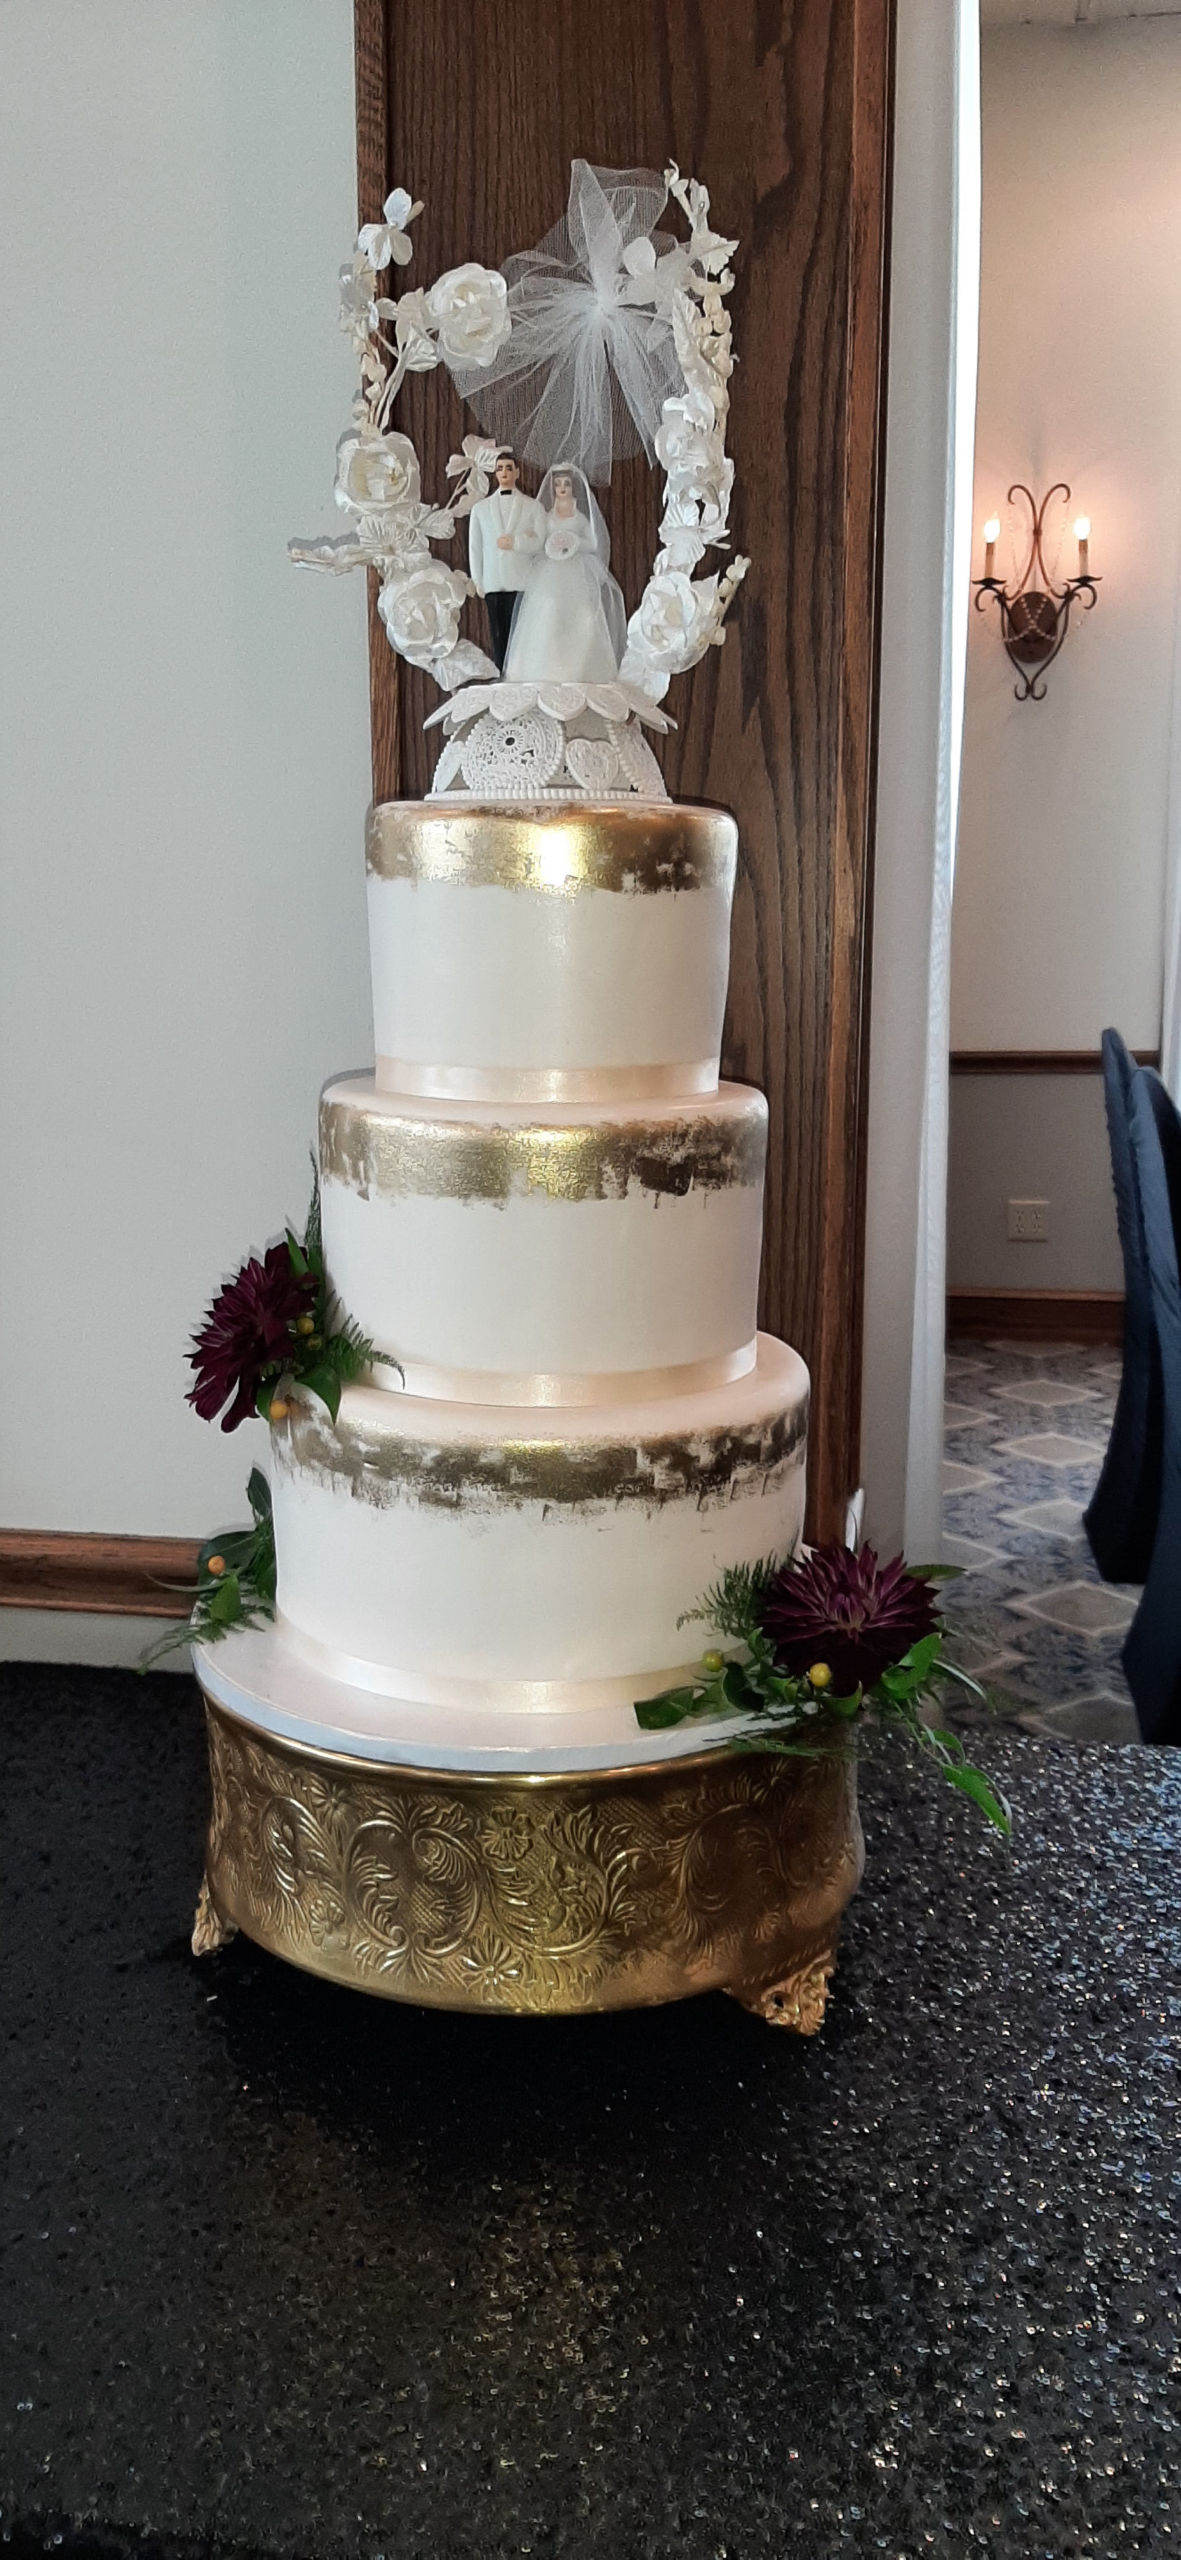 Current wedding cake trends | Zion Springs